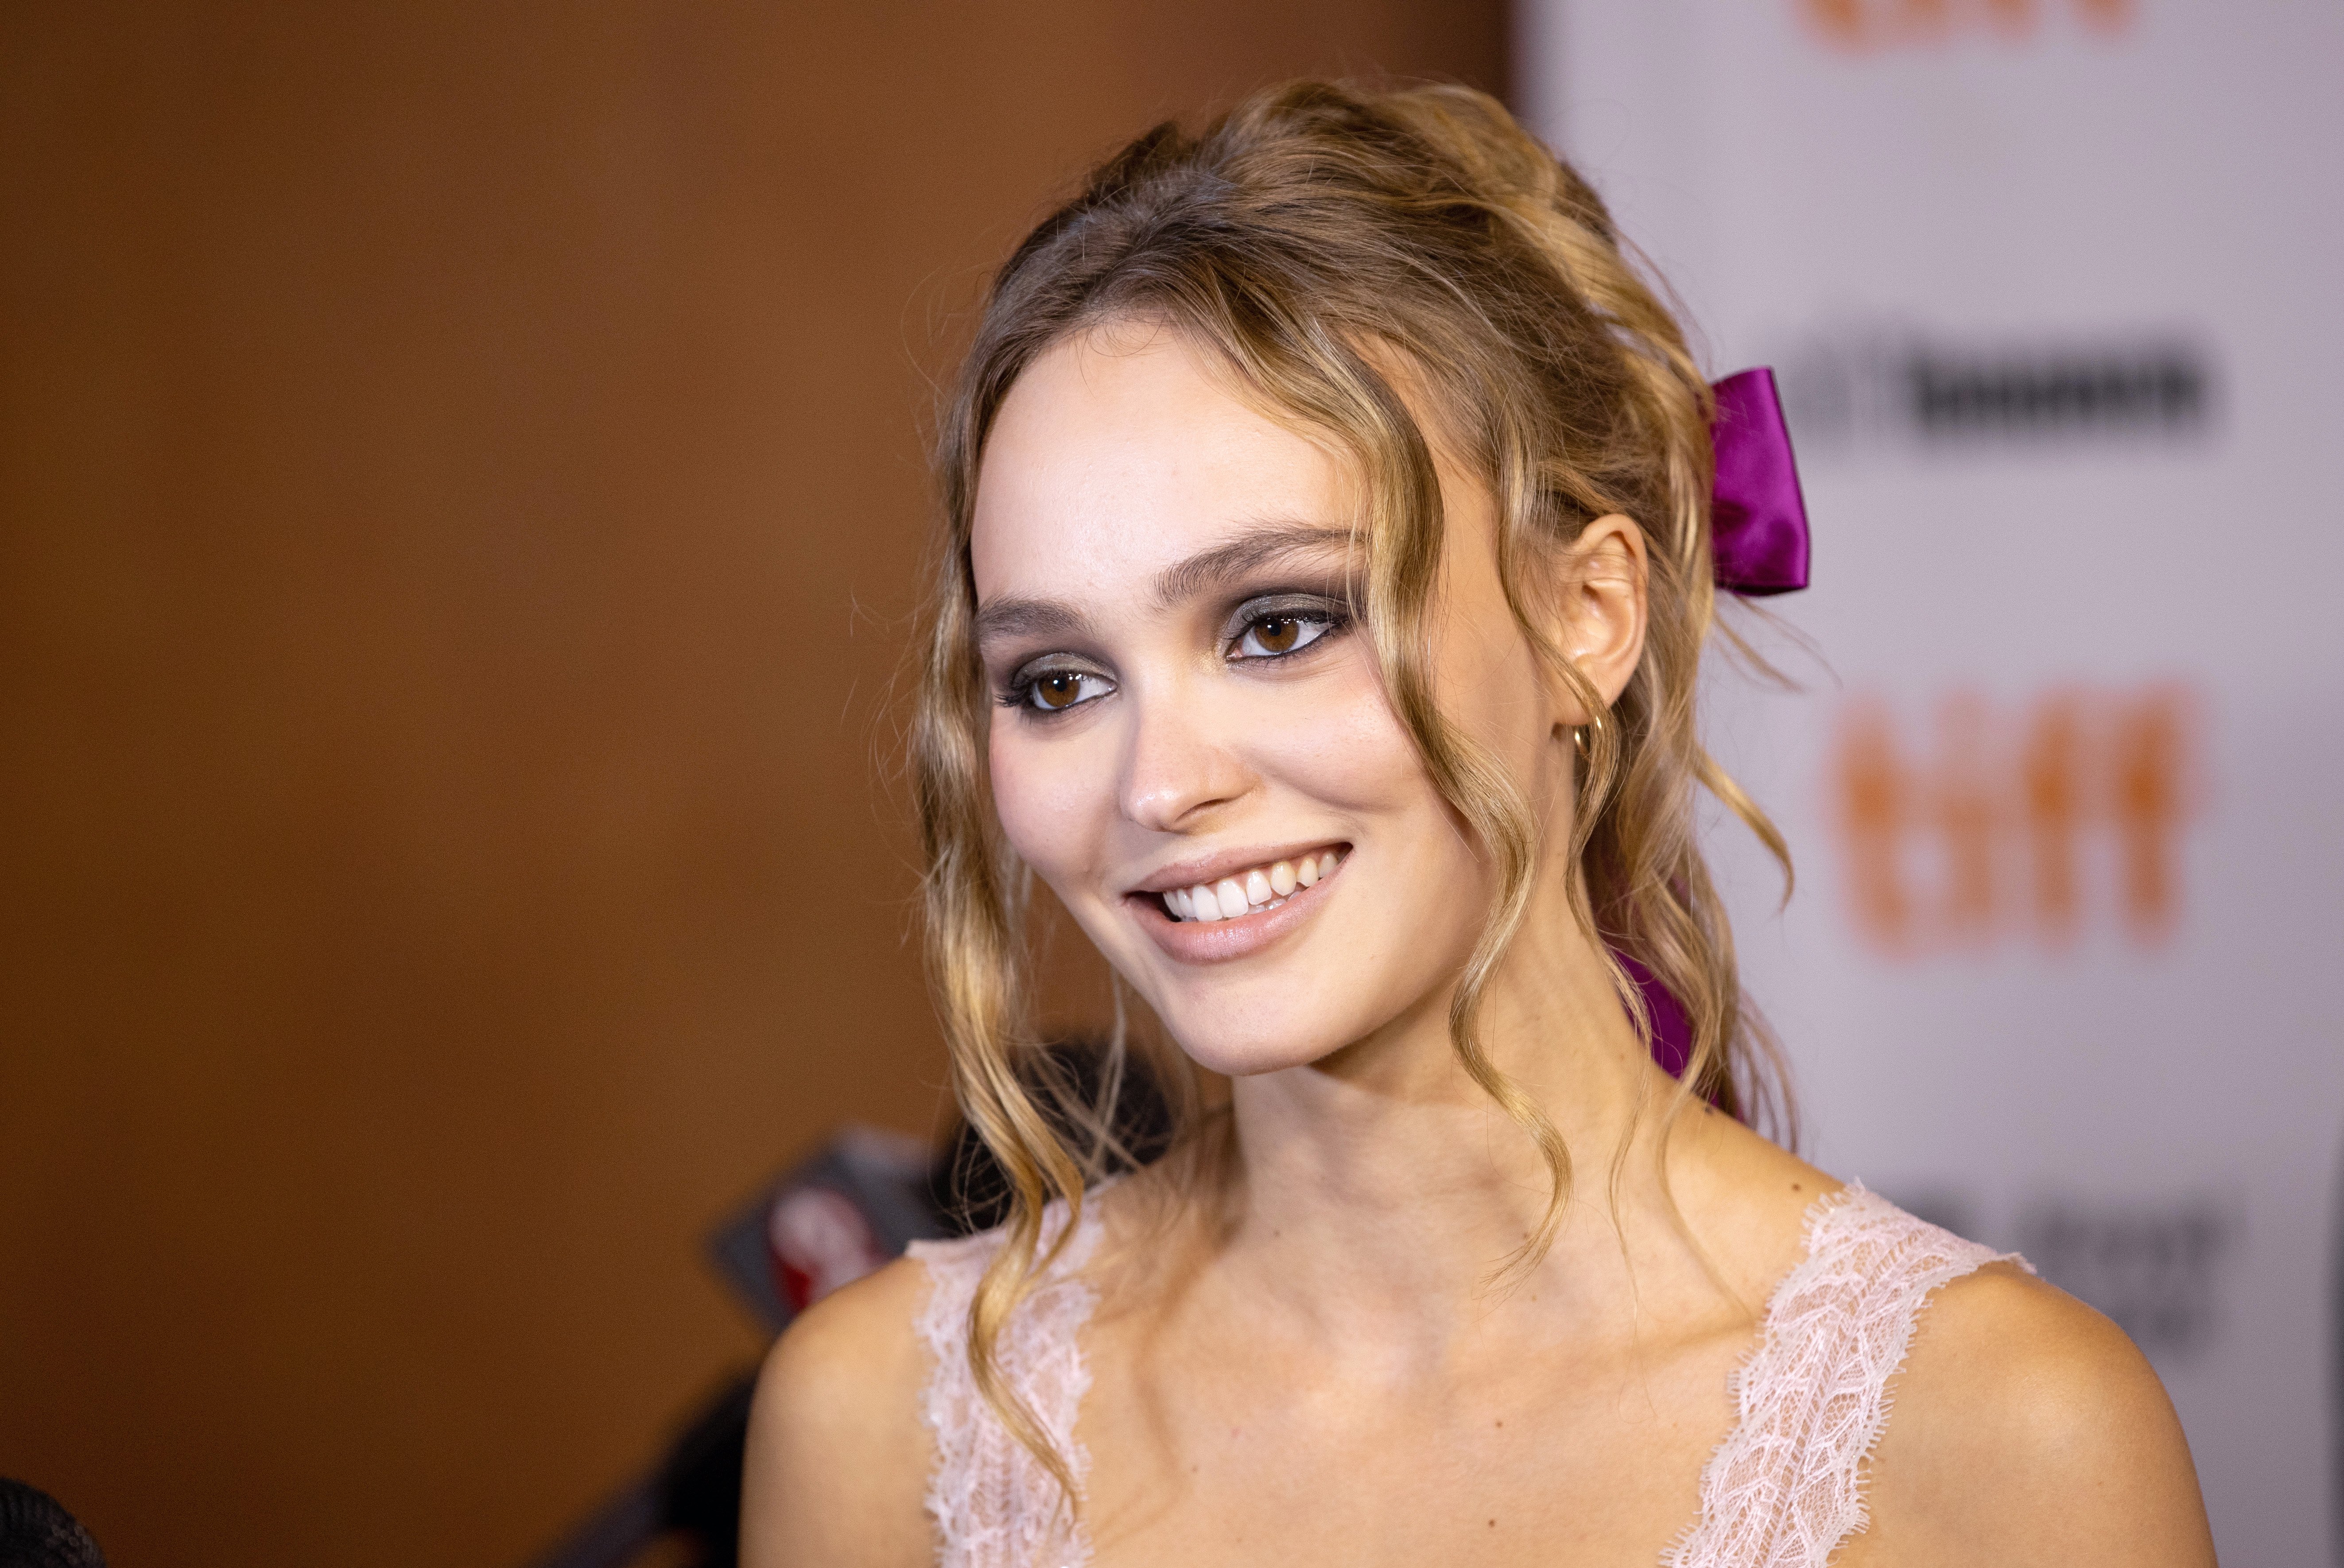 Lily-Rose Depp attends the "Wolf" Premiere during the 2021 Toronto International Film Festival at Princess of Wales Theatre on September 17, 2021, in Toronto, Ontario. | Source: Getty Images